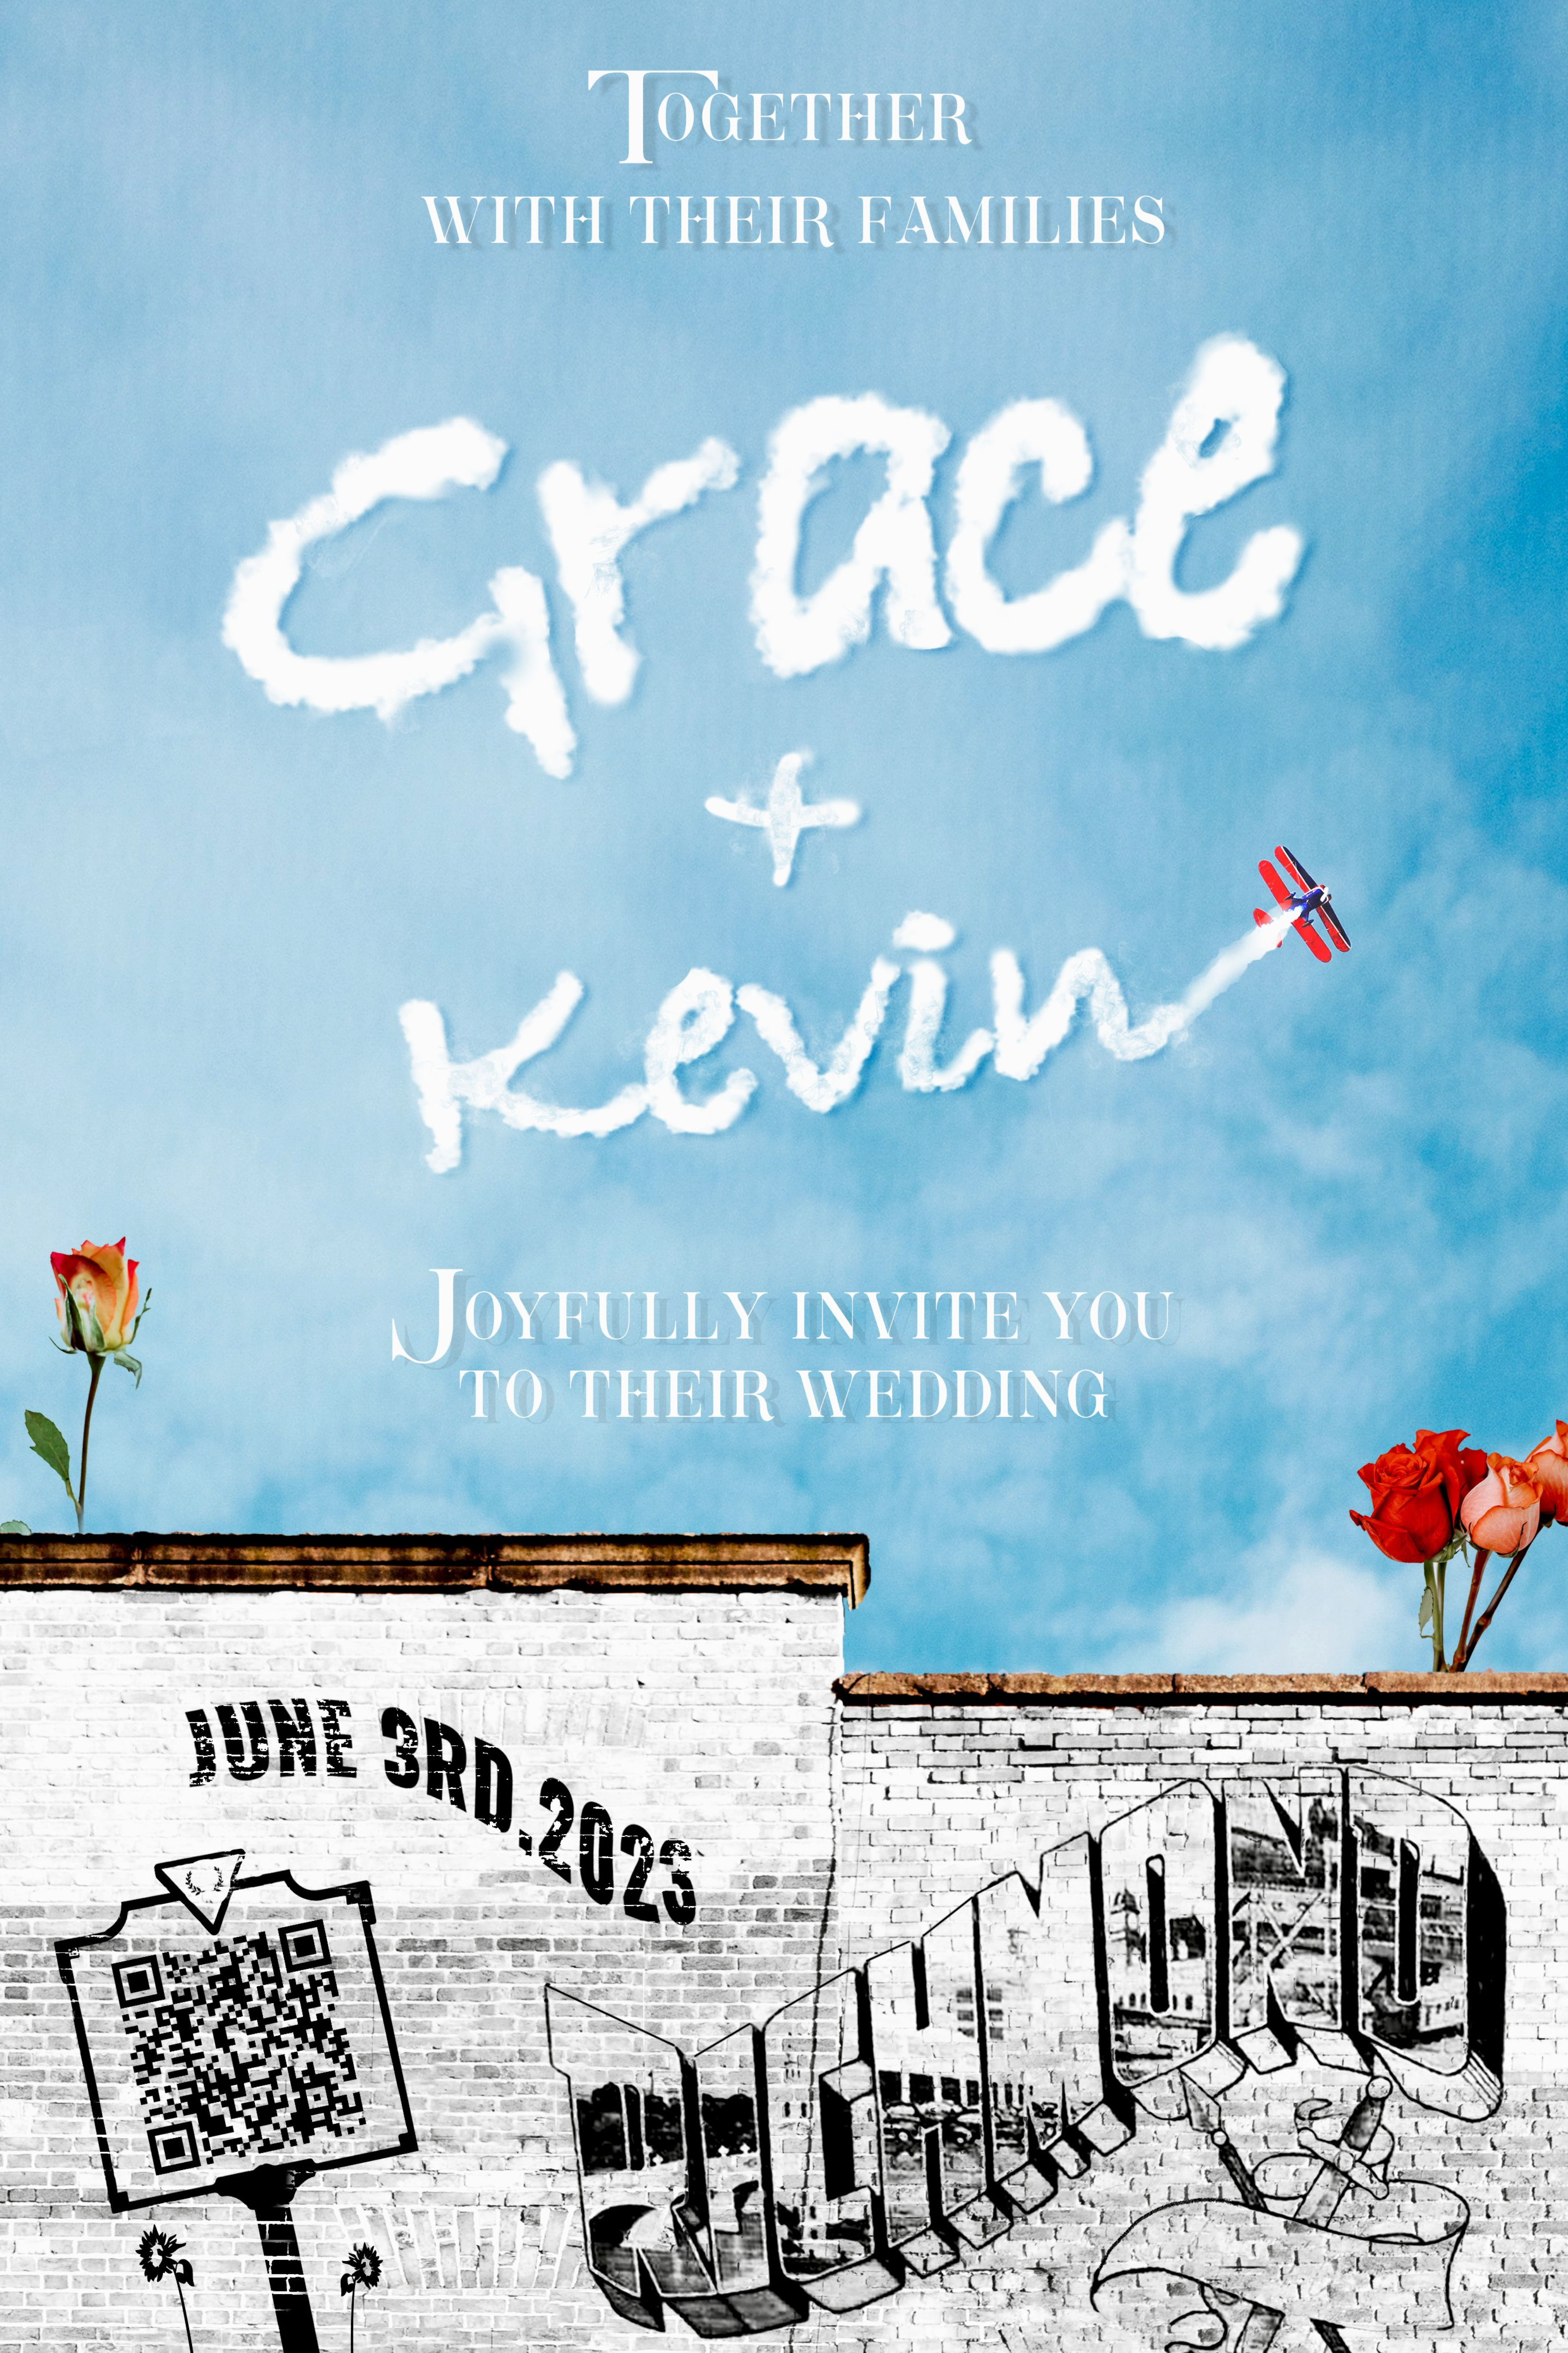 The Wedding Website of Grace Carter and Kevin Leaven